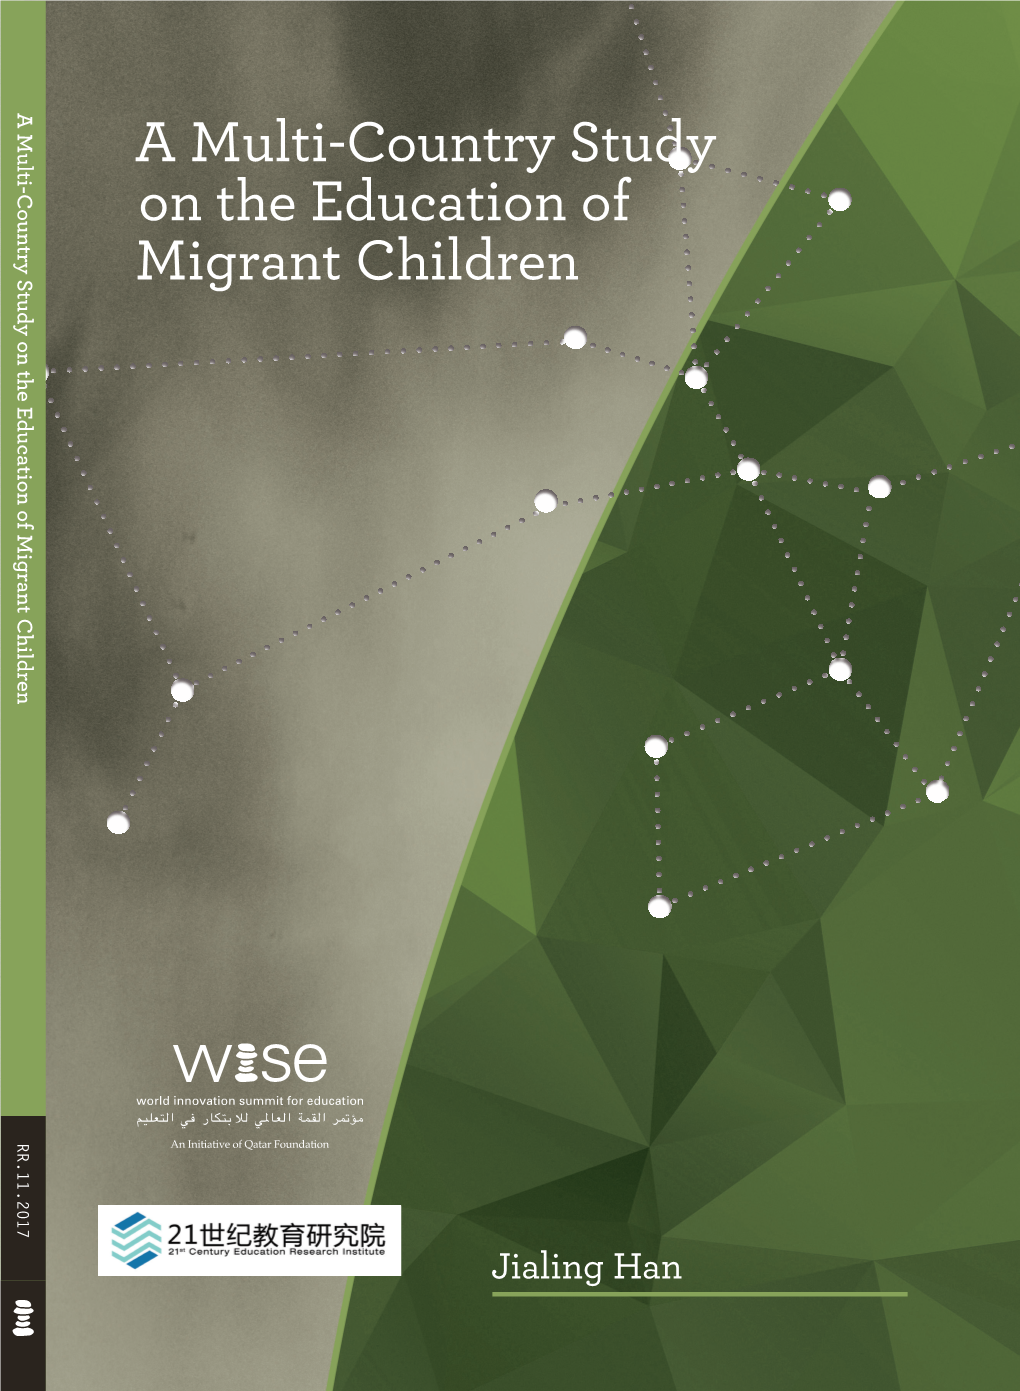 A Multi-Country Study on the Education of Migrant Children a Multi-Country Study